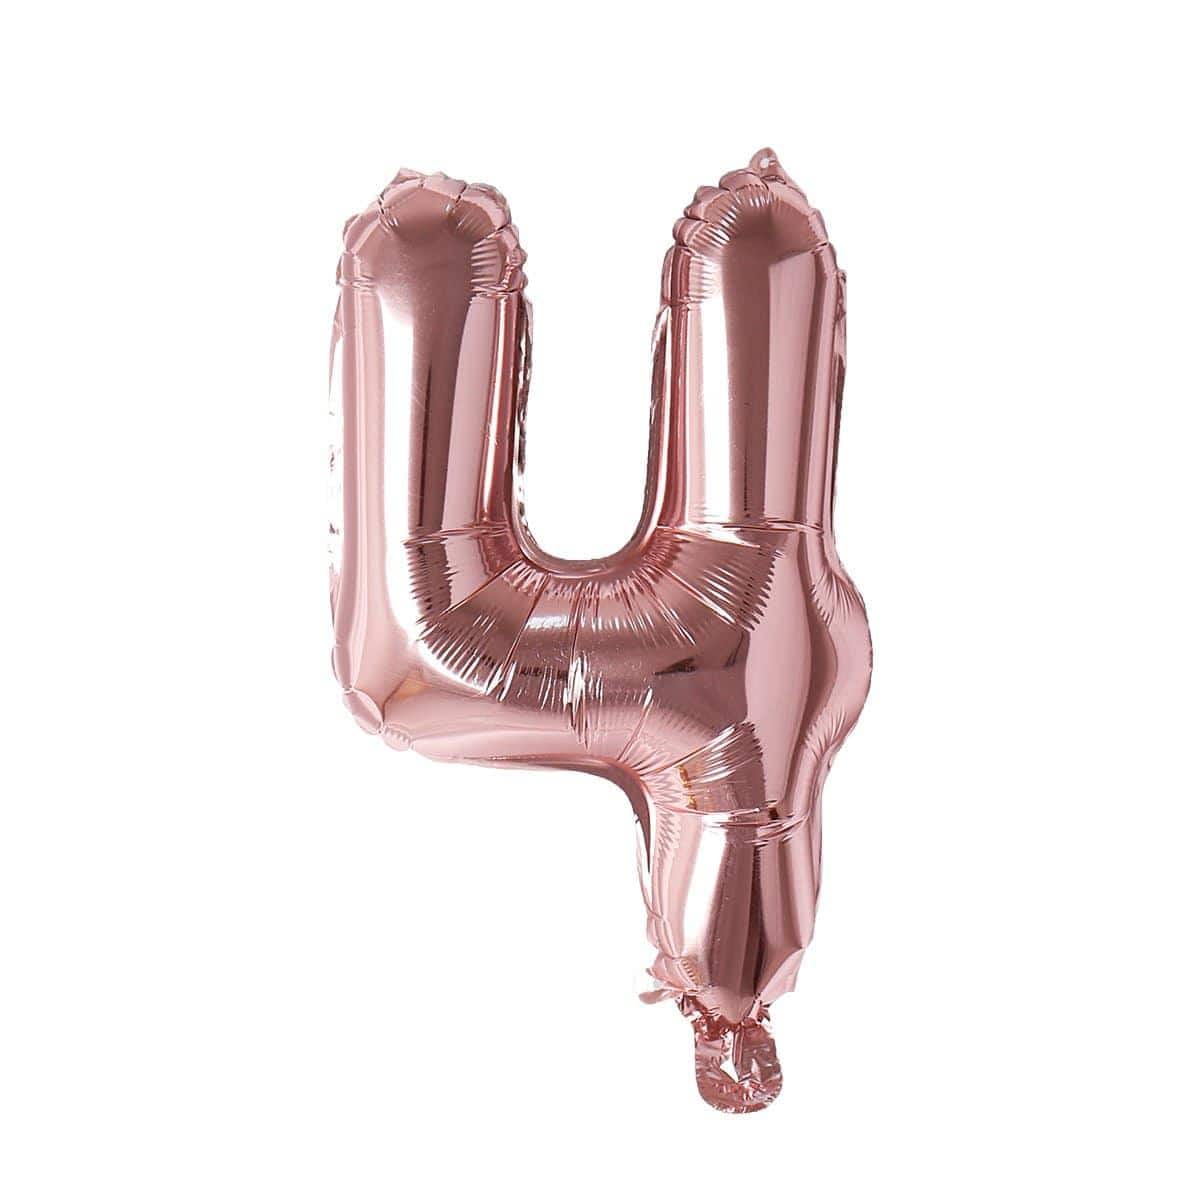 Buy Balloons Rose Gold Number 4 Foil Balloon, 16 Inches sold at Party Expert